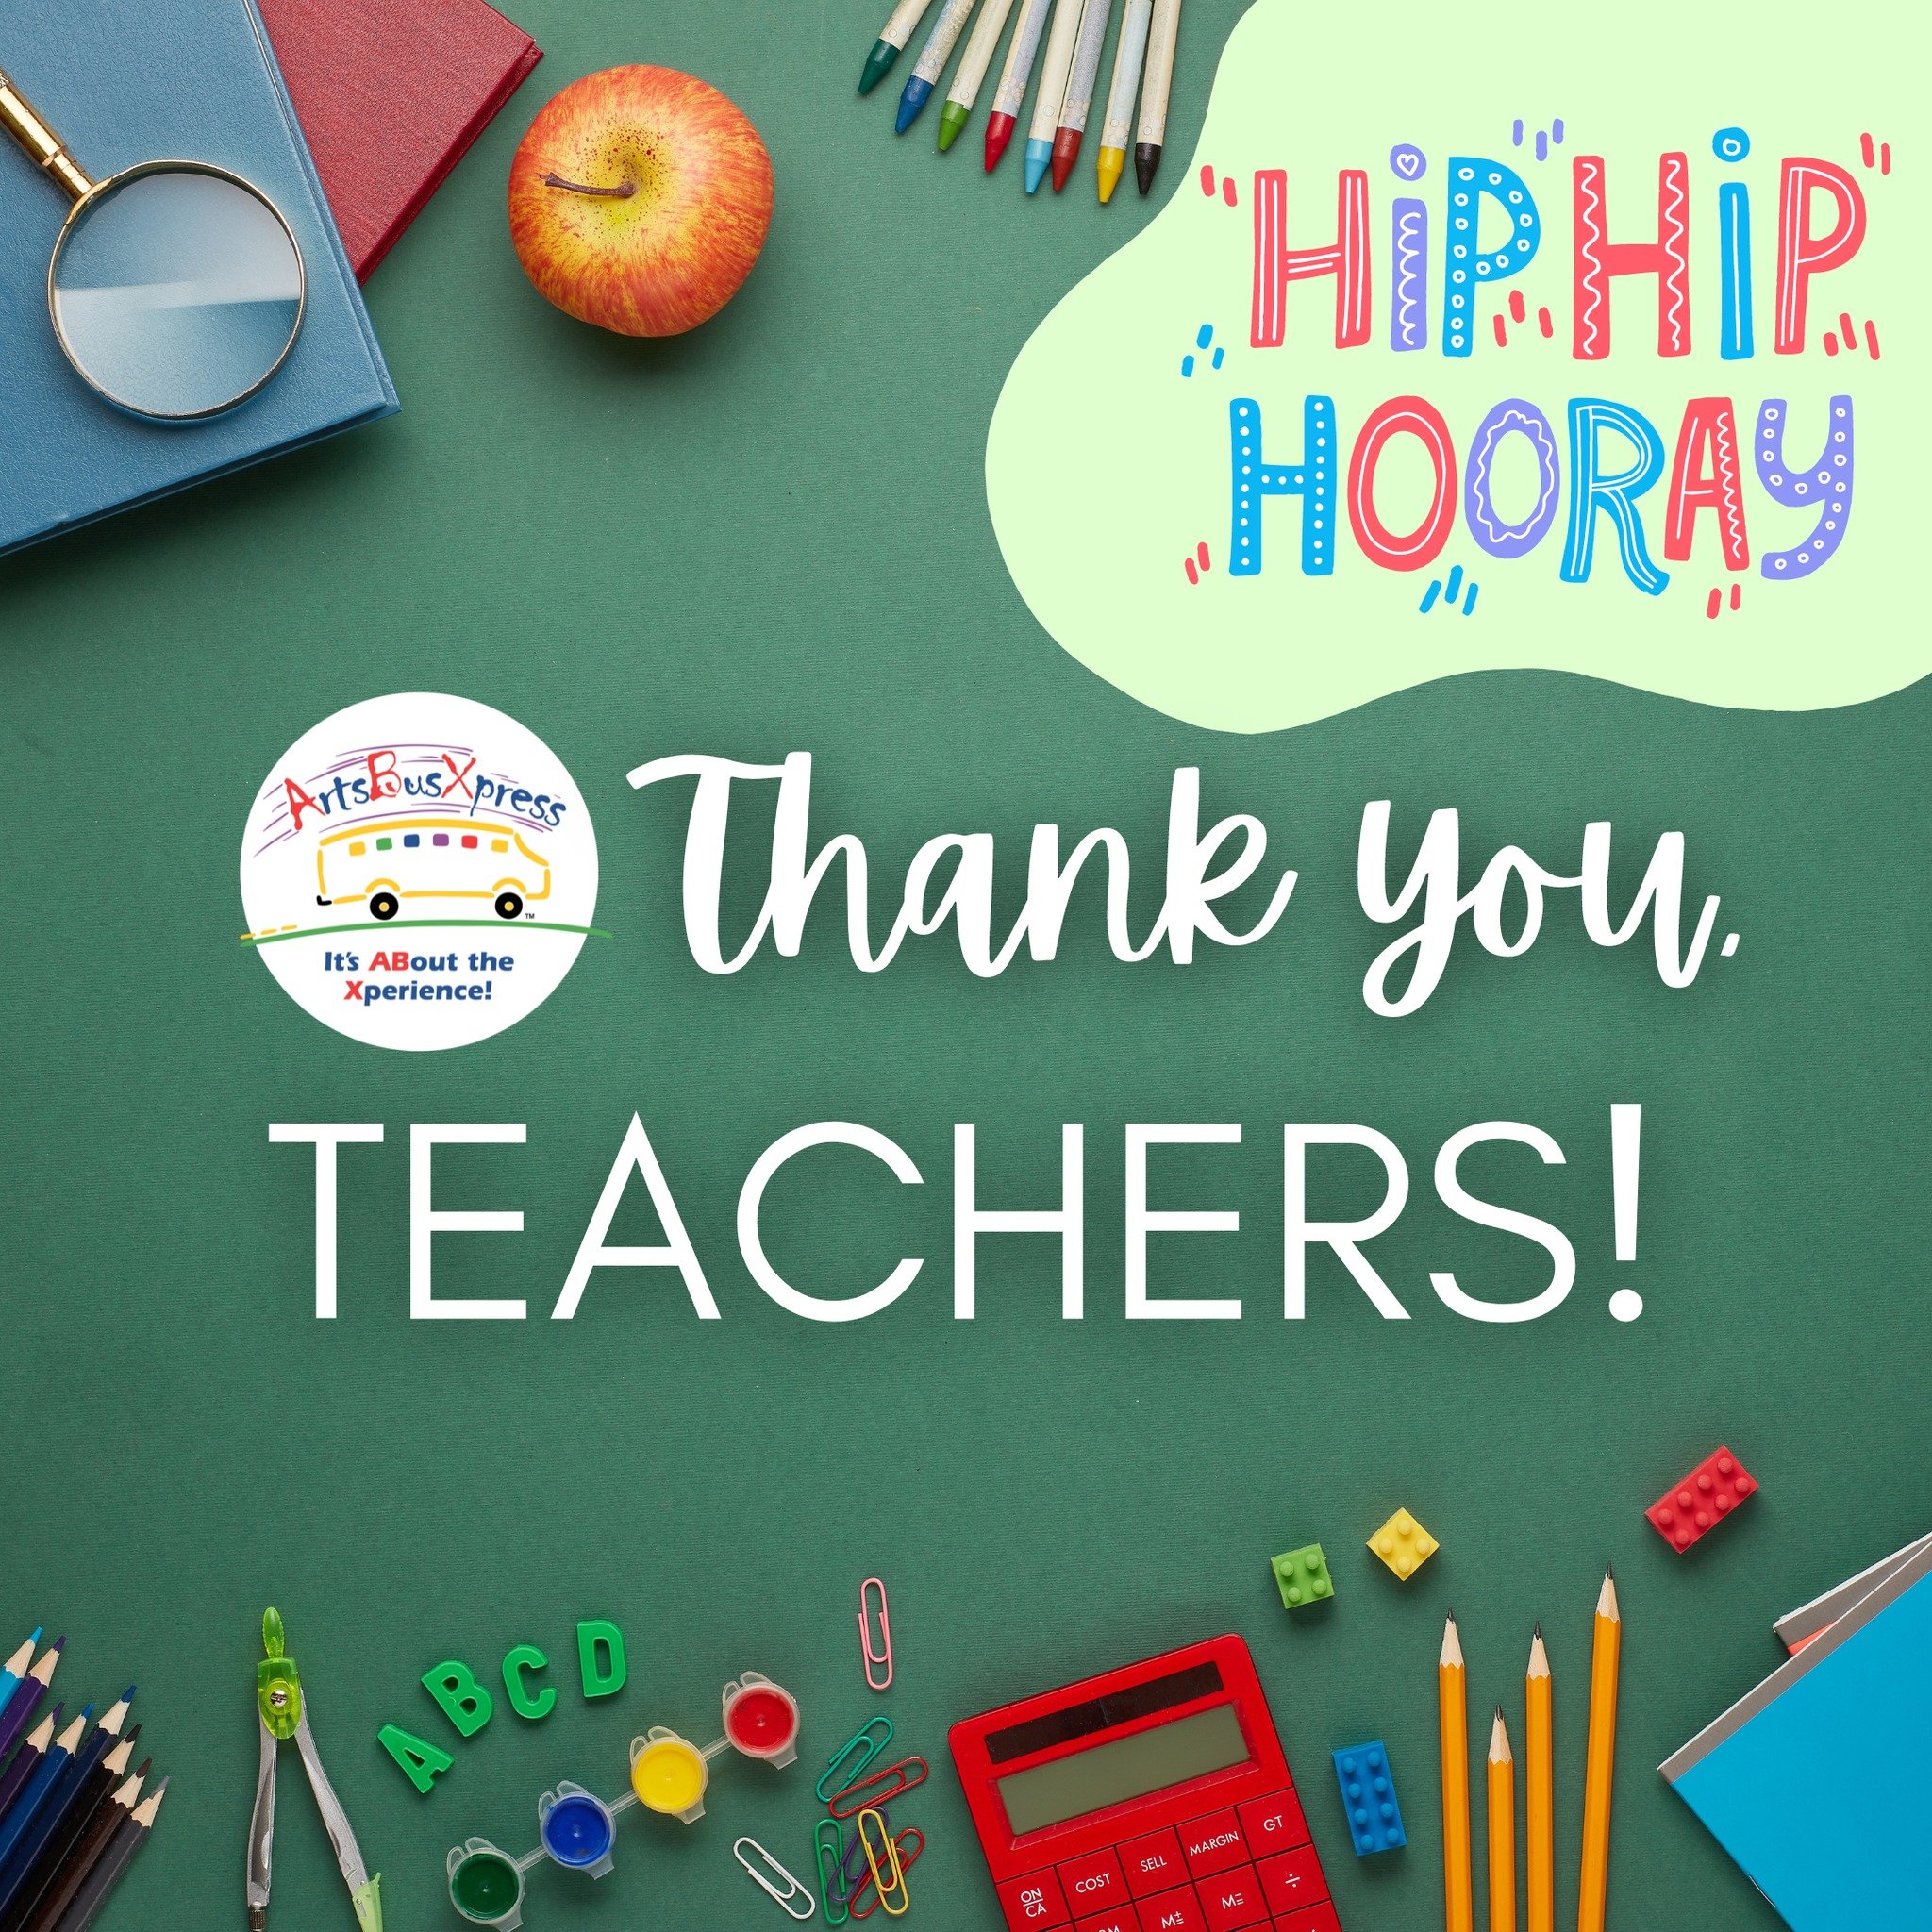 Hip Hip Hooray! 🎉 This week, we celebrate all the wonderful teachers! Leave a comment below and share your favorite story about how a teacher impacted your life 🚌 🍎 ❤️